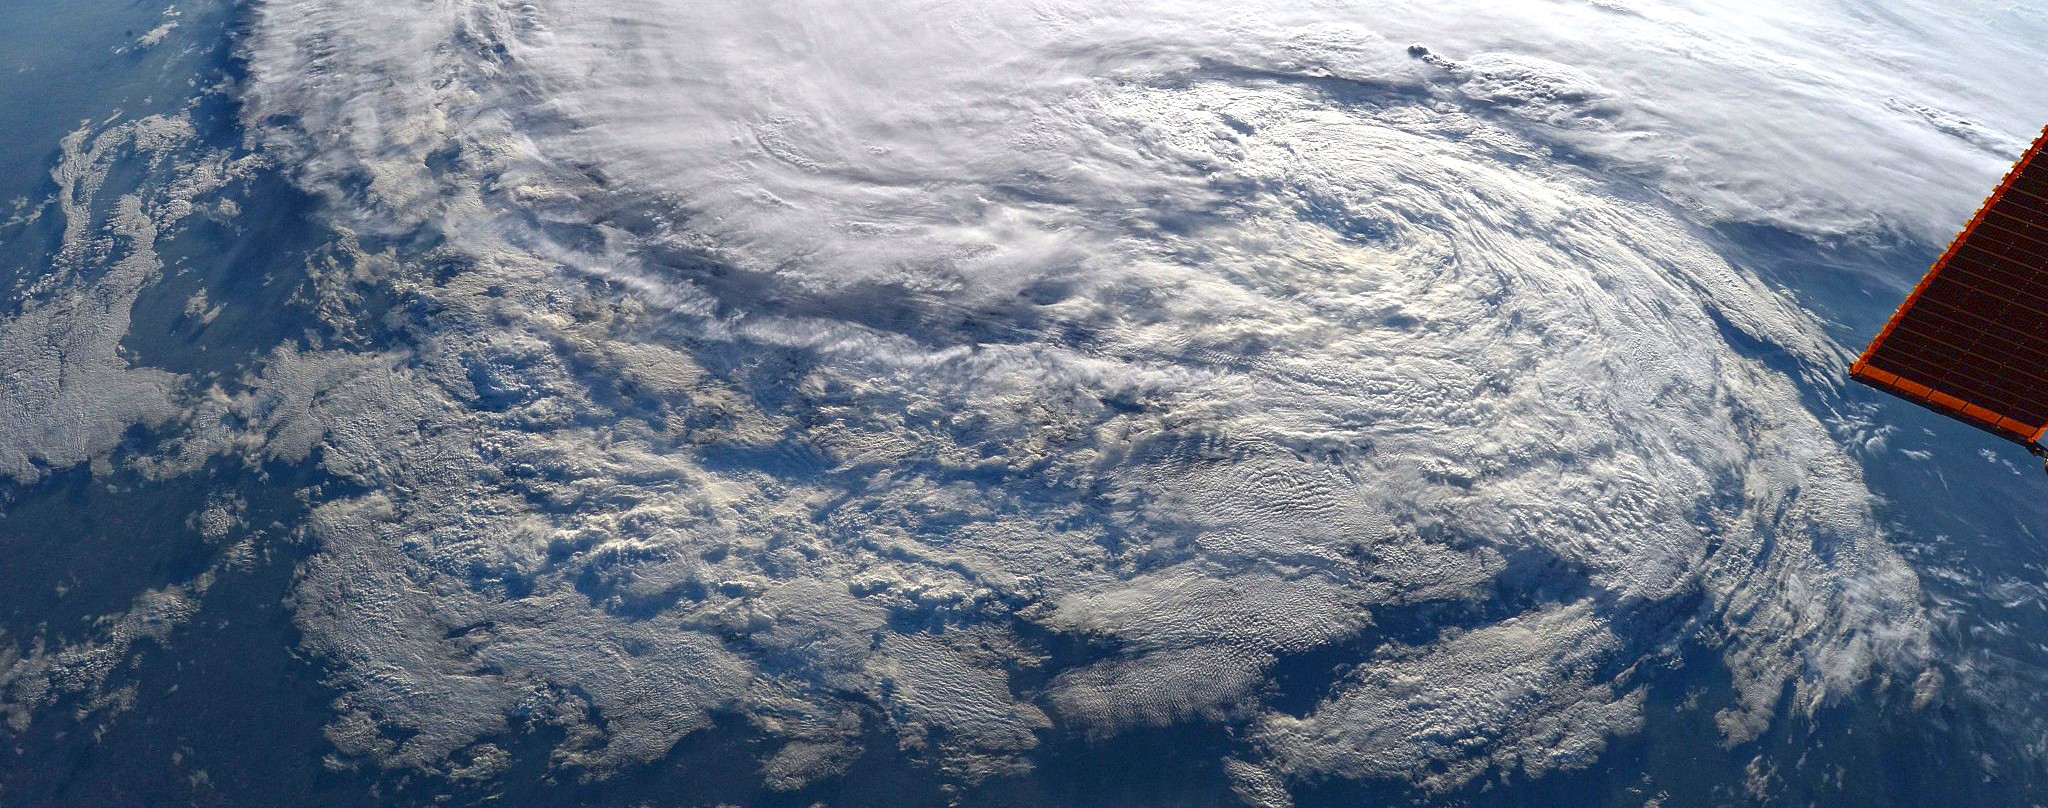 As Tropical Storm Harvey continues along the Gulf Coast, NASA has canceled a planned Aug. 30 question and answer session with astronaut Peggy Whitson aboard the International Space Station. NASA astronaut Randy Bresnik took this photo of the storm Aug. 28 from the orbiting laboratory.